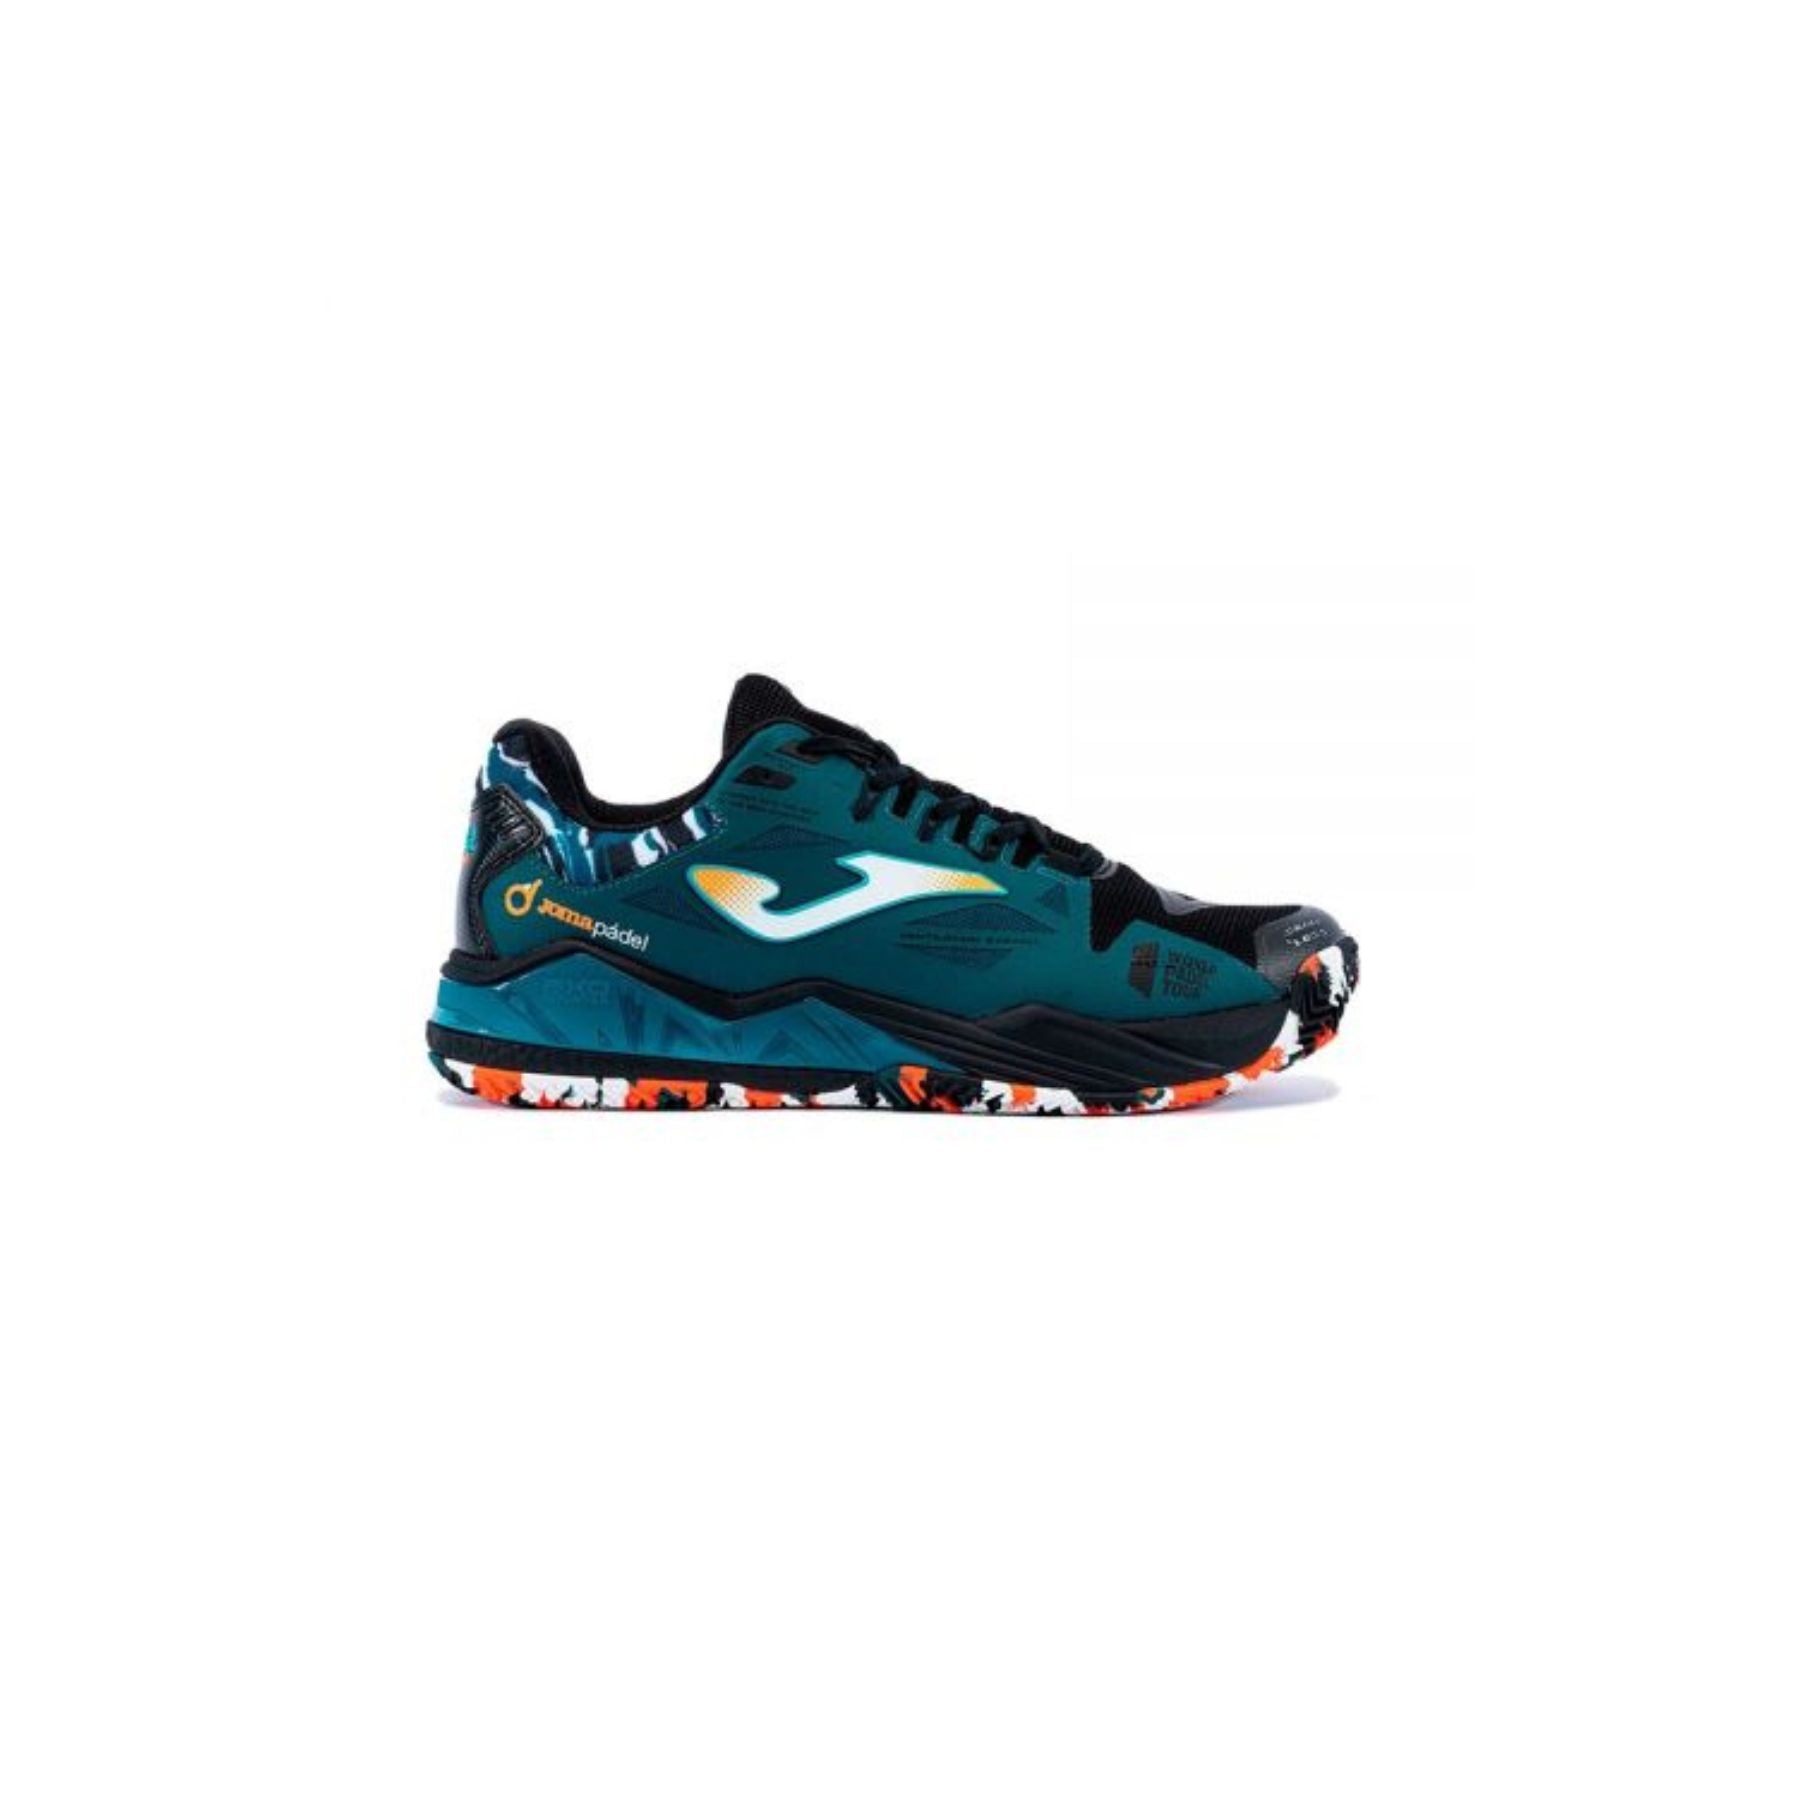 JOMA T SPIN 2301